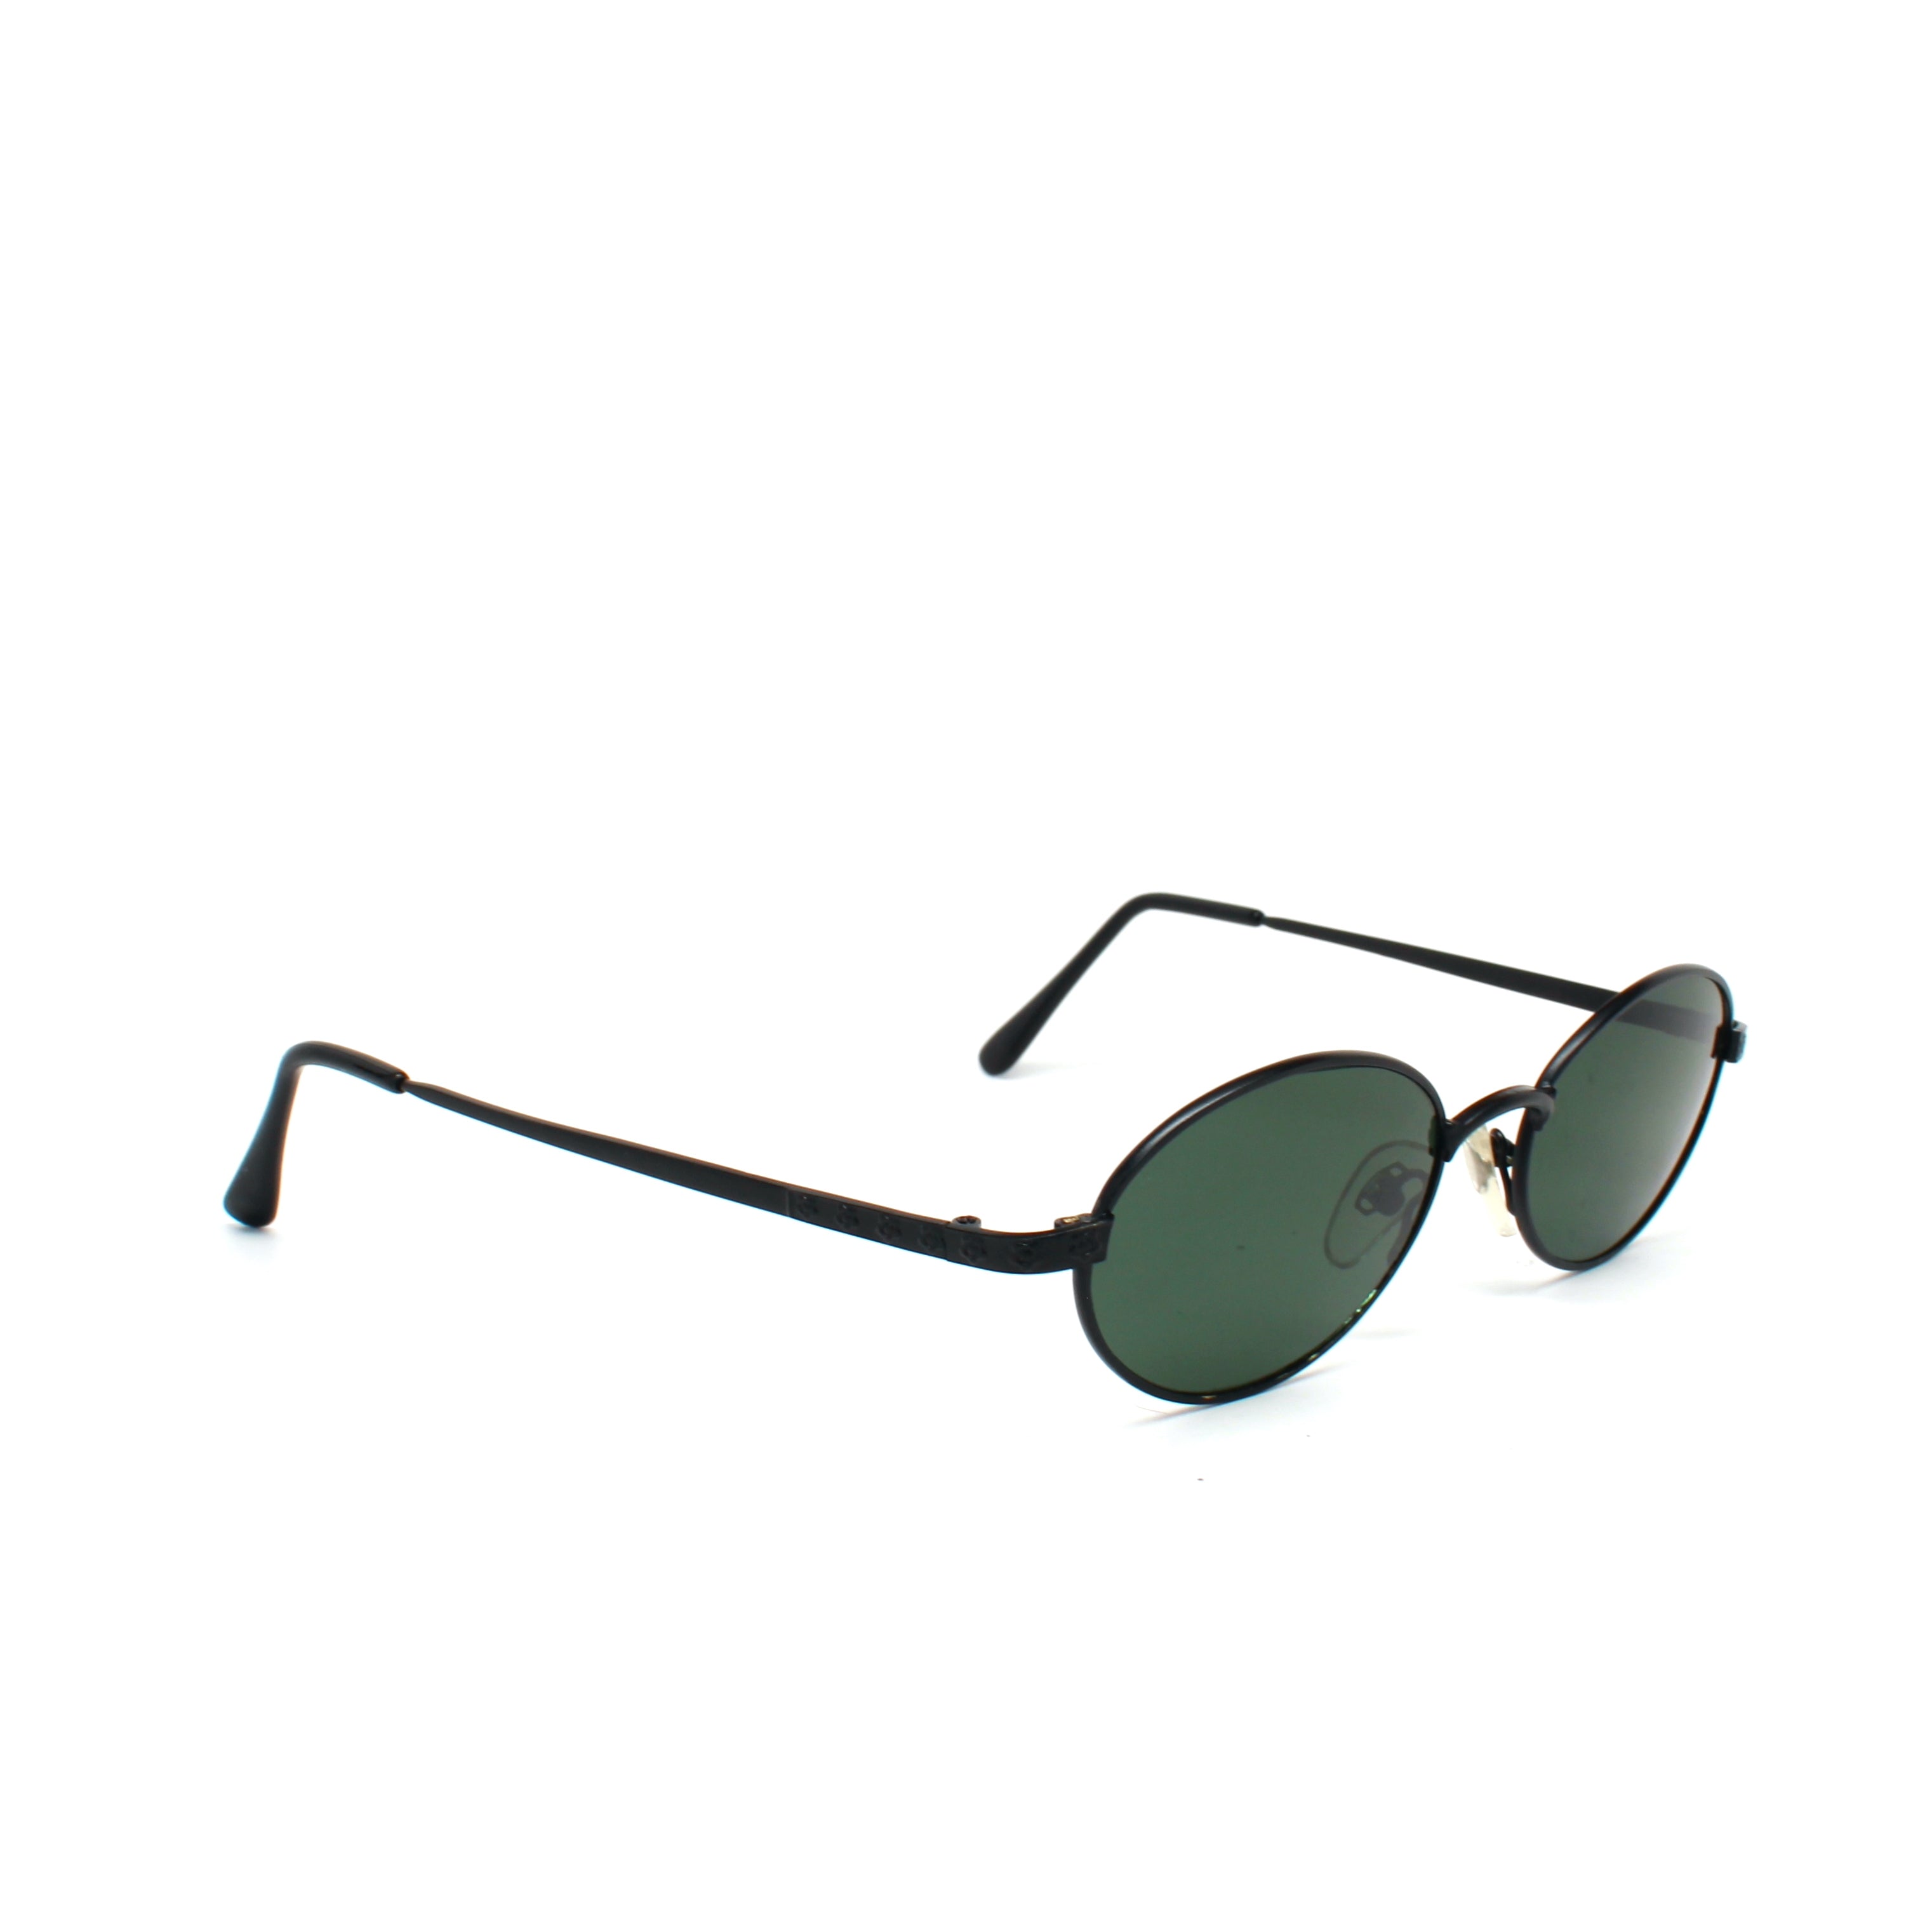 Top Best Selling Sunglasses at Giustizieri Vecchi: Must-Have Styles